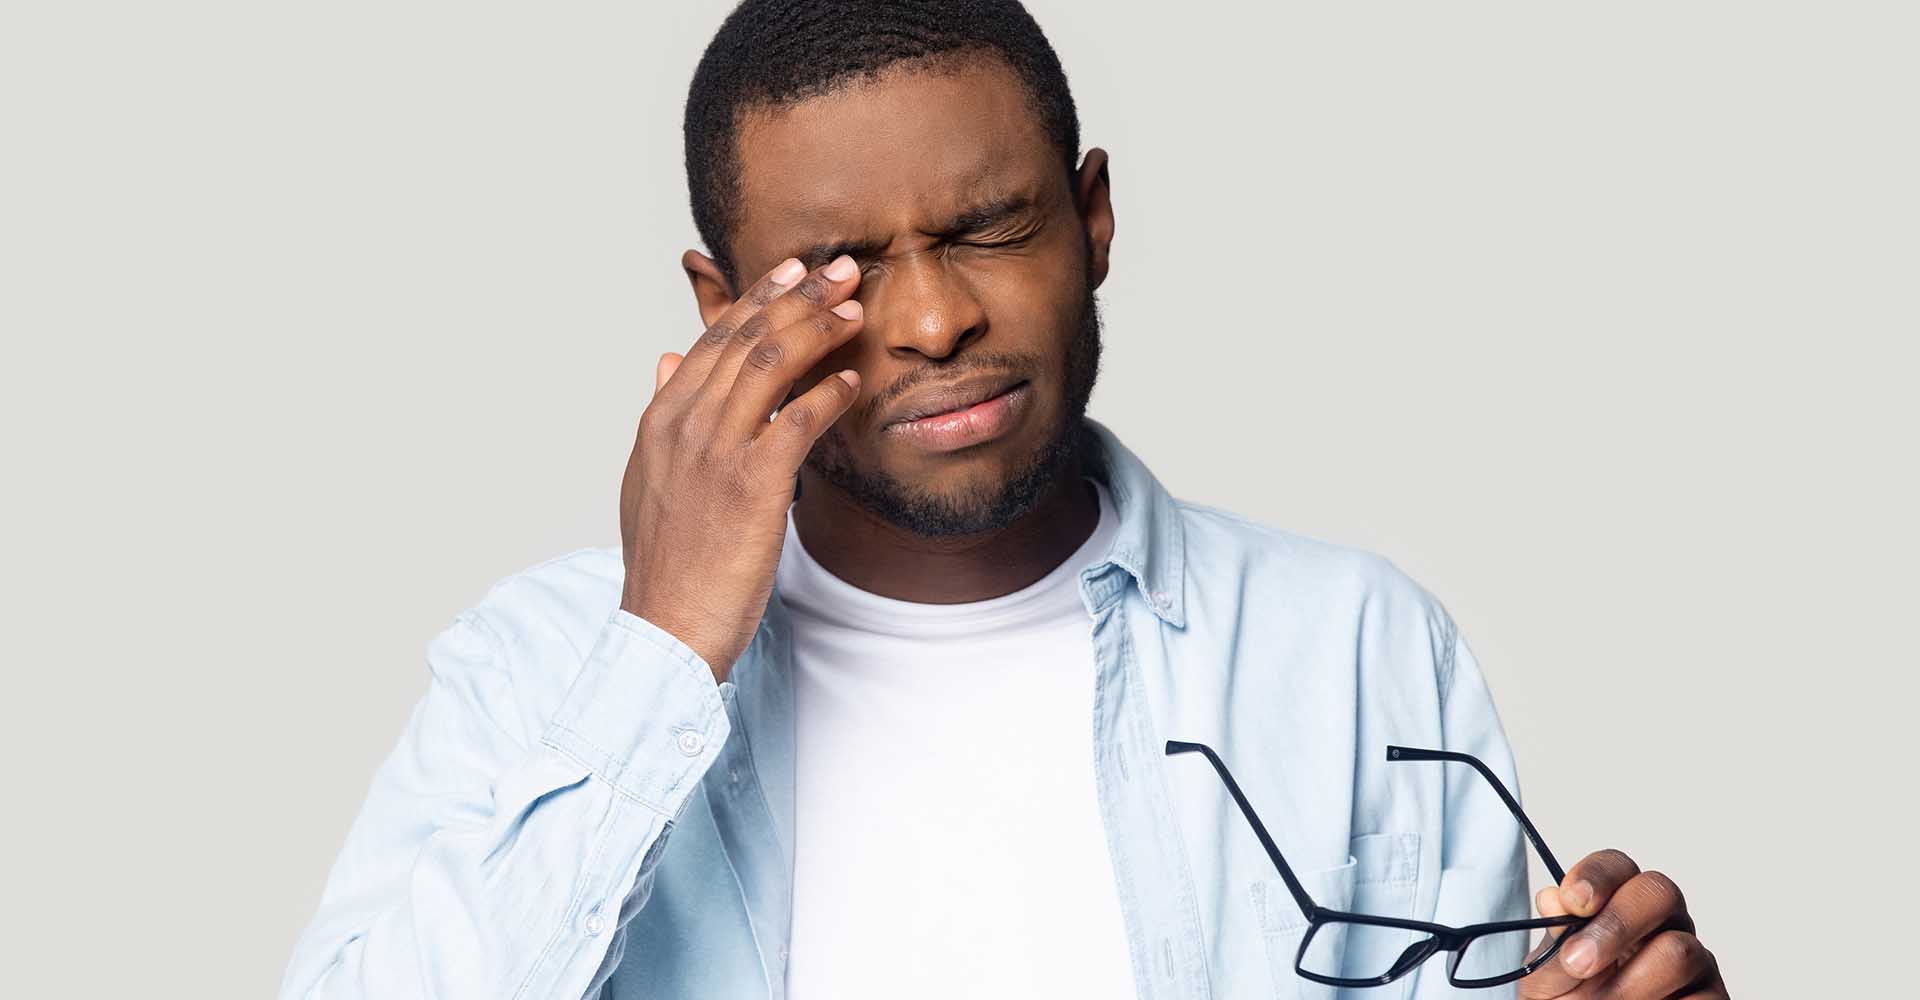 African American man suffering from pain connnected with nasal disorder touching painful over-eye area with his hand and holding glasses in the other hand